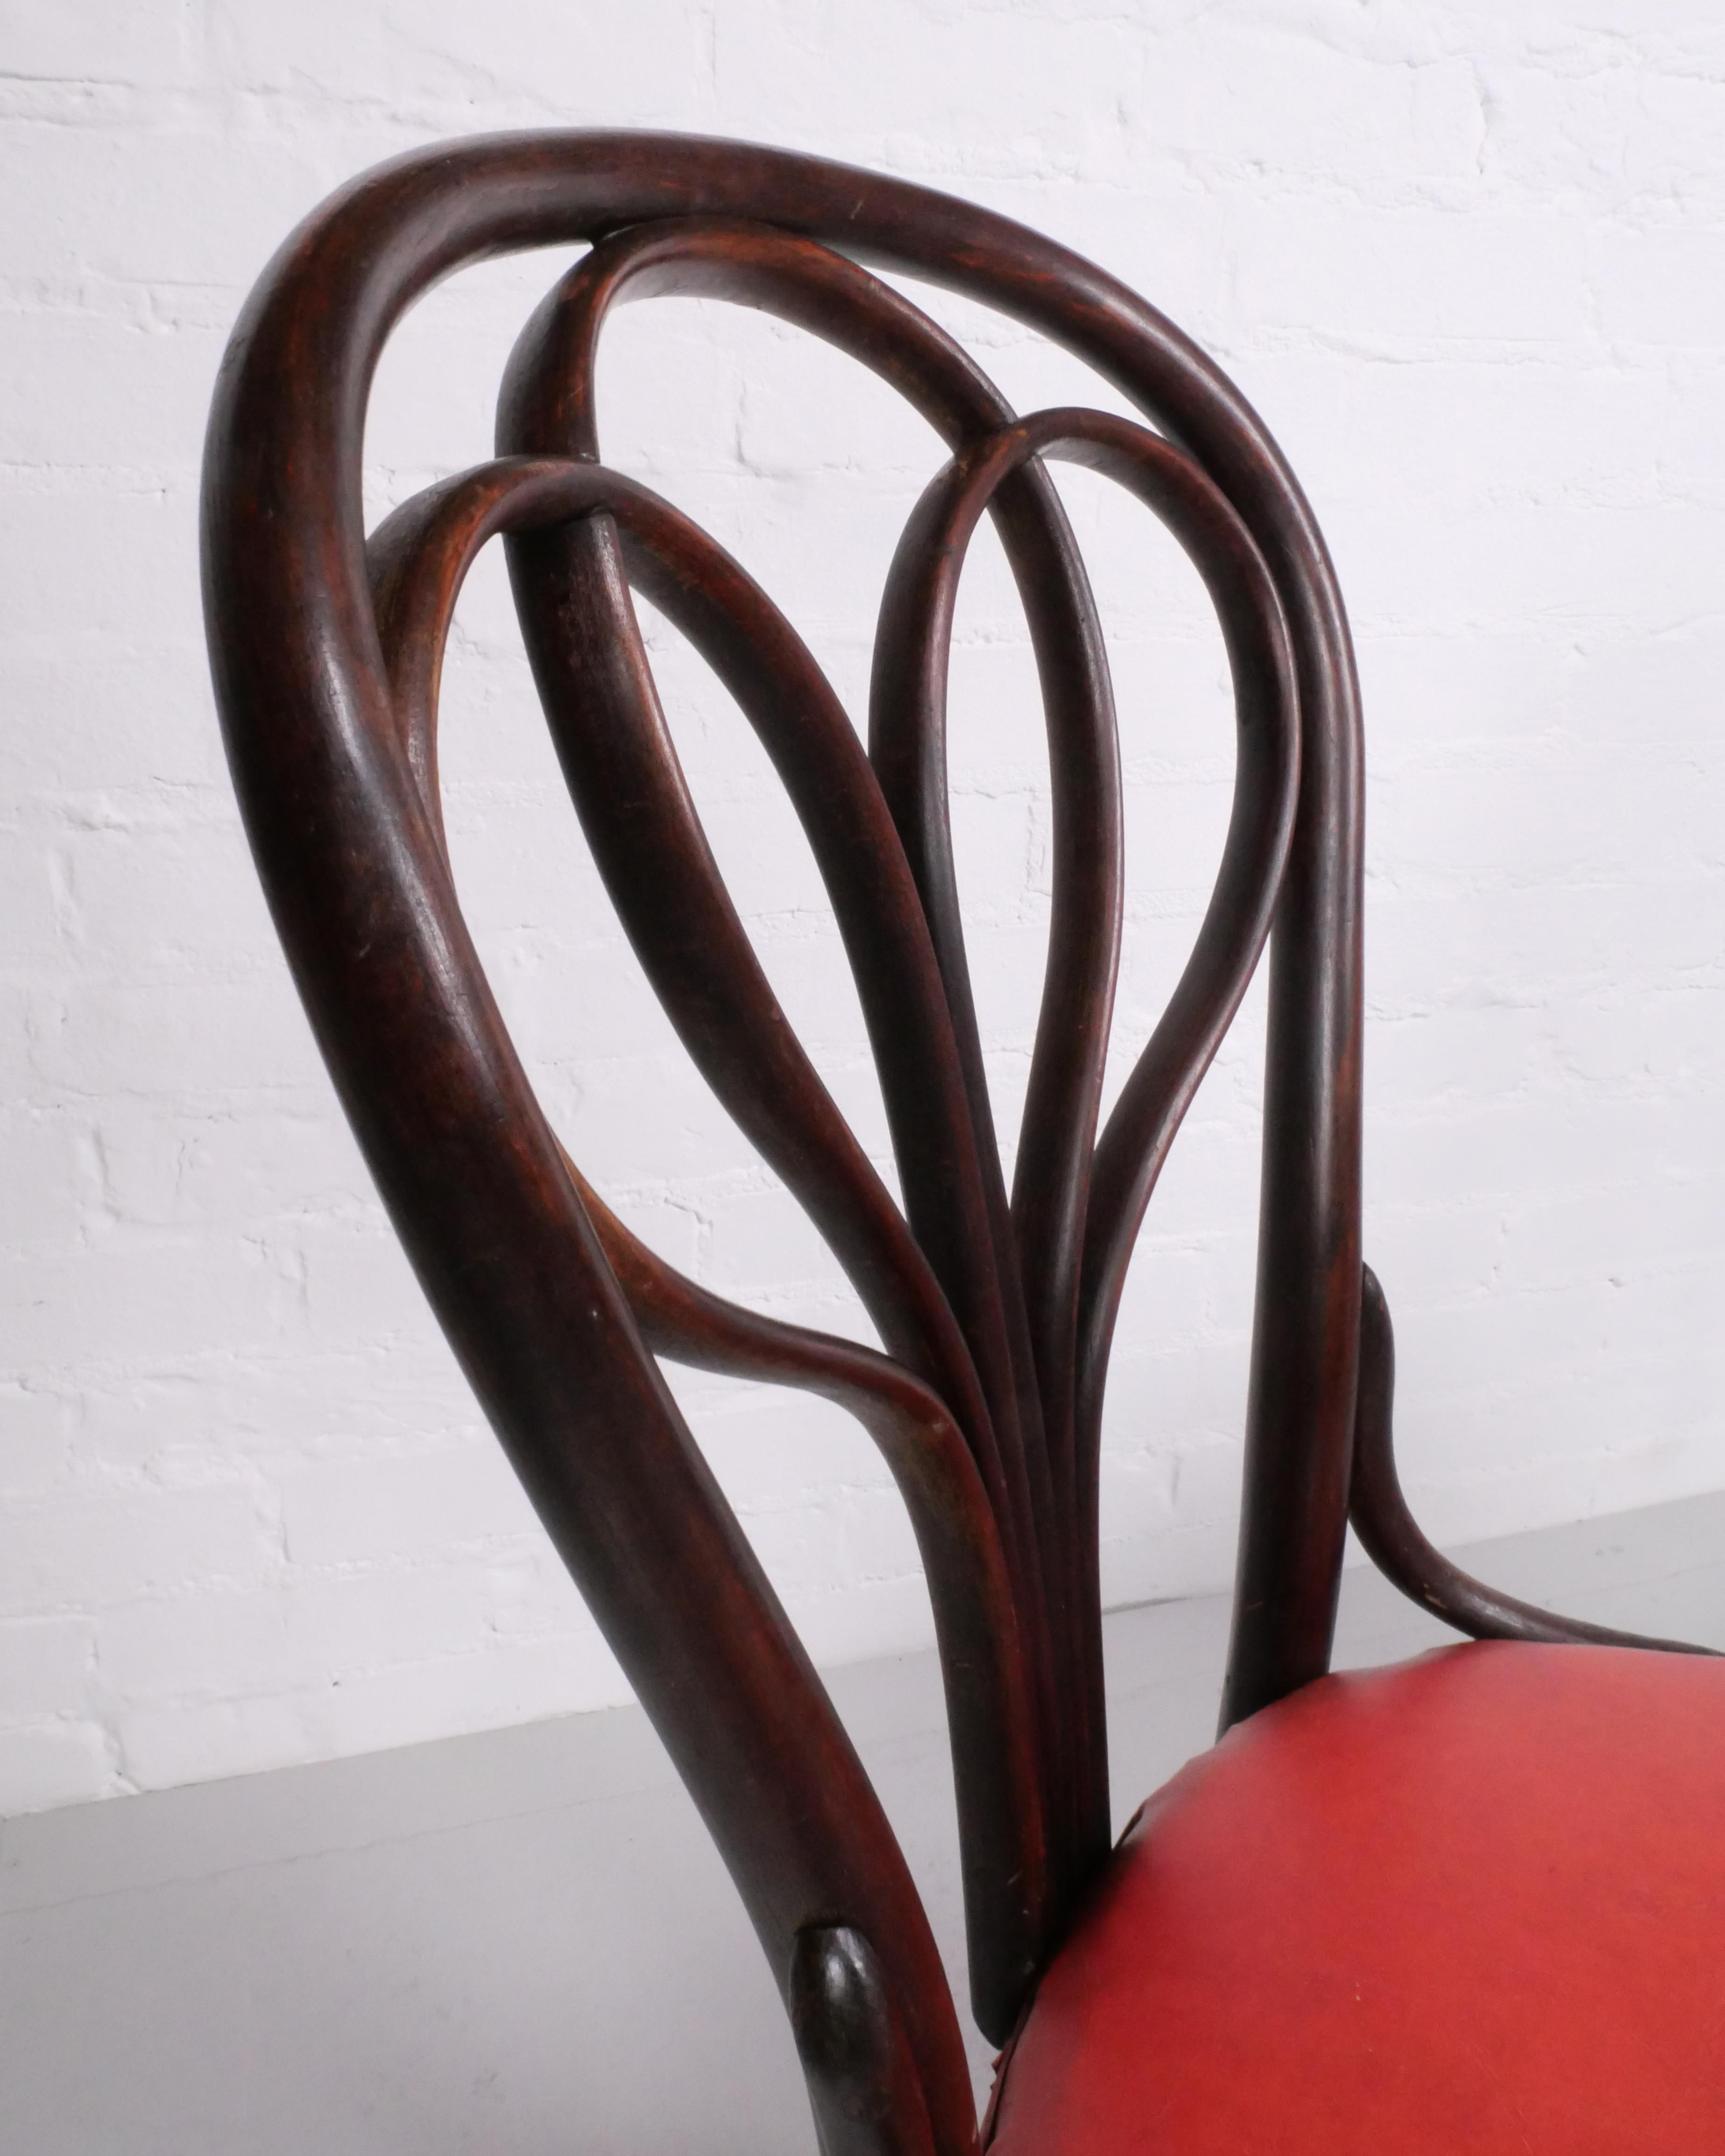 19th Century Set of 4 no.25 dining chairs by Gebrüder Thonet, c. 1870 For Sale